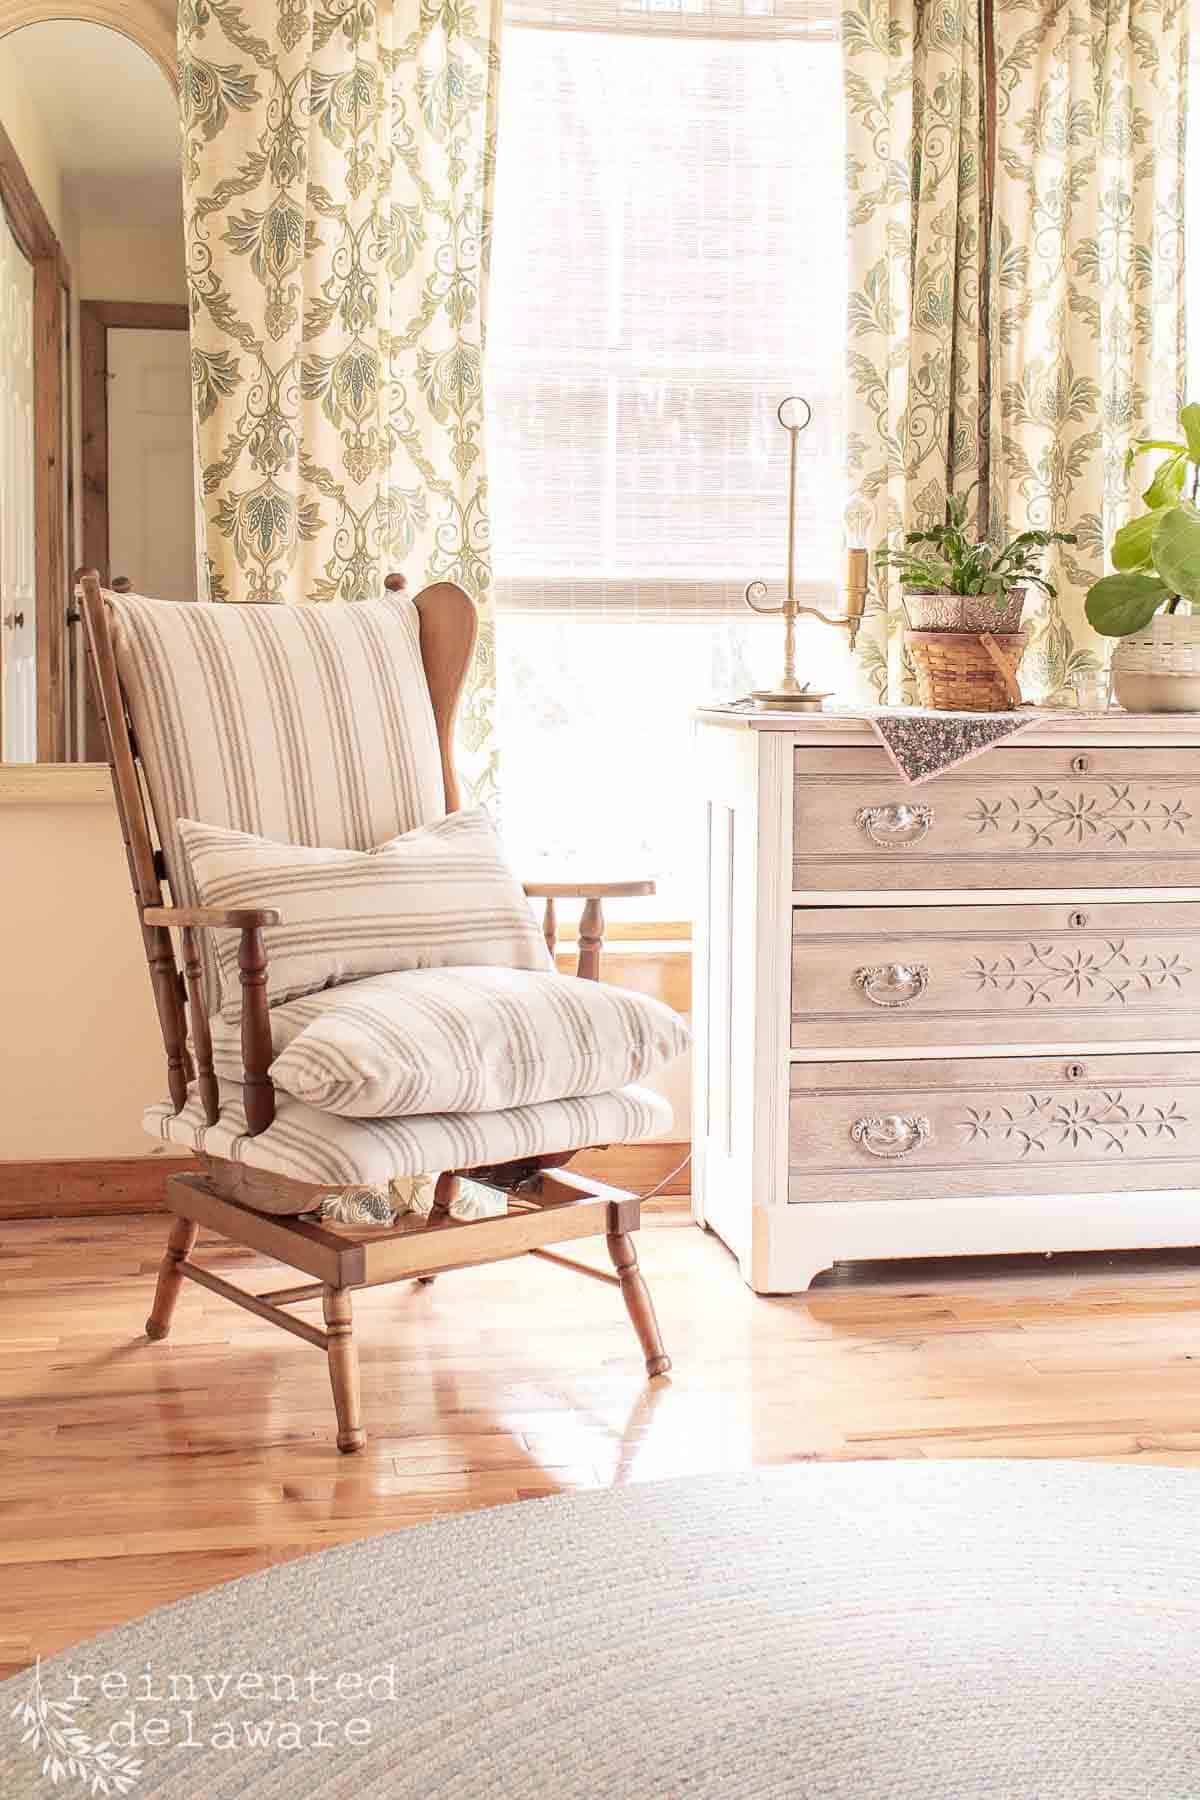 reupholstered rocking chair in a bedroom with vintage dresser